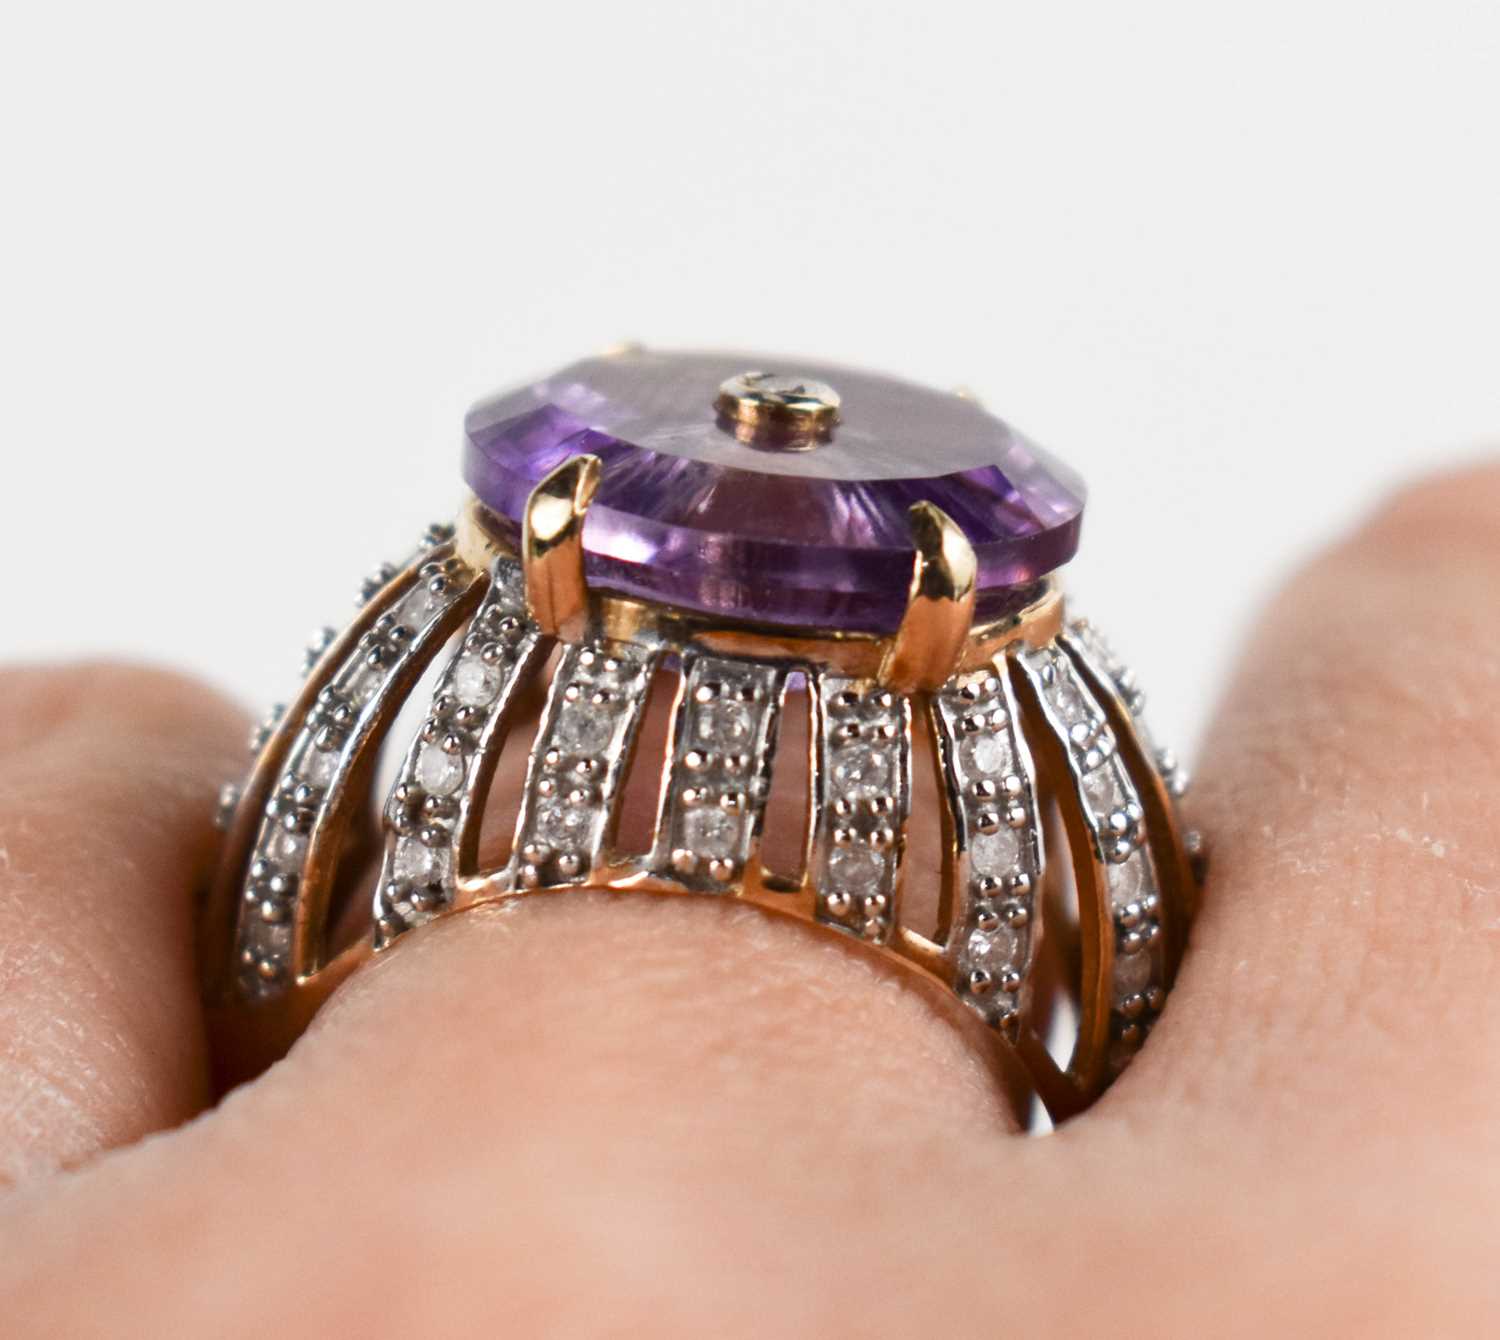 A Lehrer 9ct gold and Torusring amethyst and diamond ring, size O, 5.4g. - Image 2 of 7